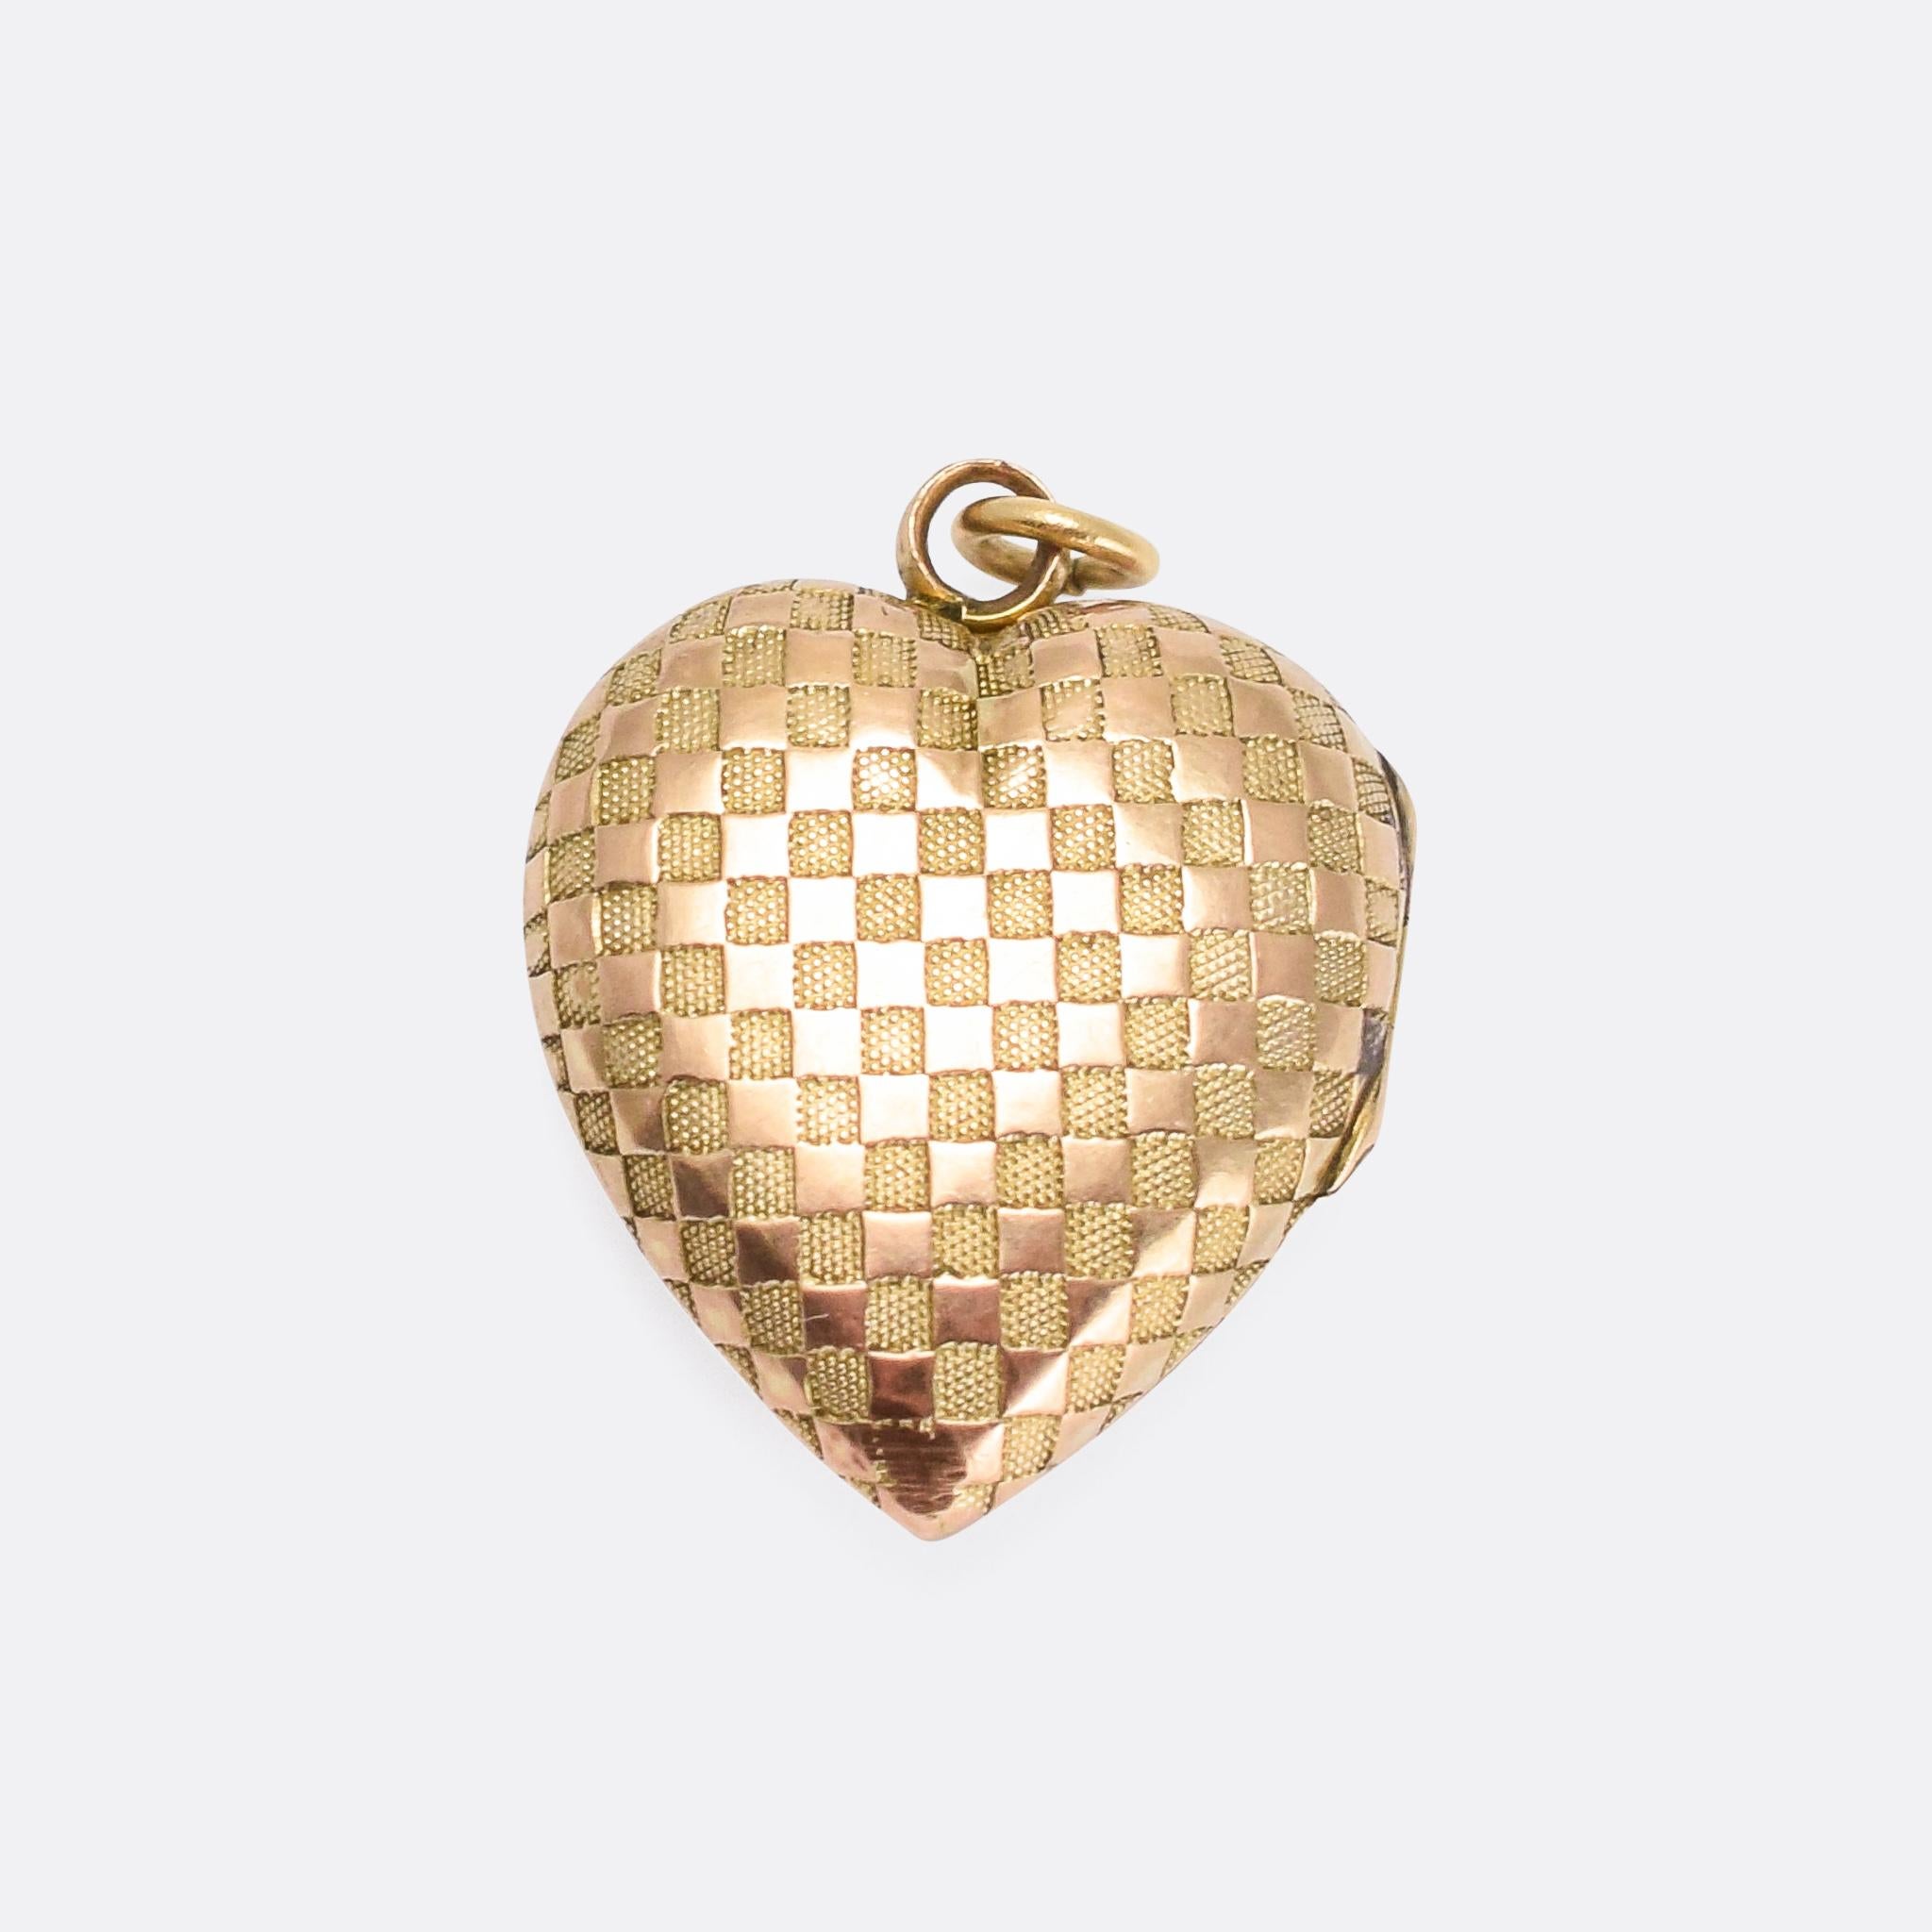 A sweet antique heart locket dating from the late Victorian era, circa 1900. Modelled in 9 karat gold, the front and back are both decorated with a chequerboard design – alternating rows of textured and shiny squares. It opens to reveal two internal